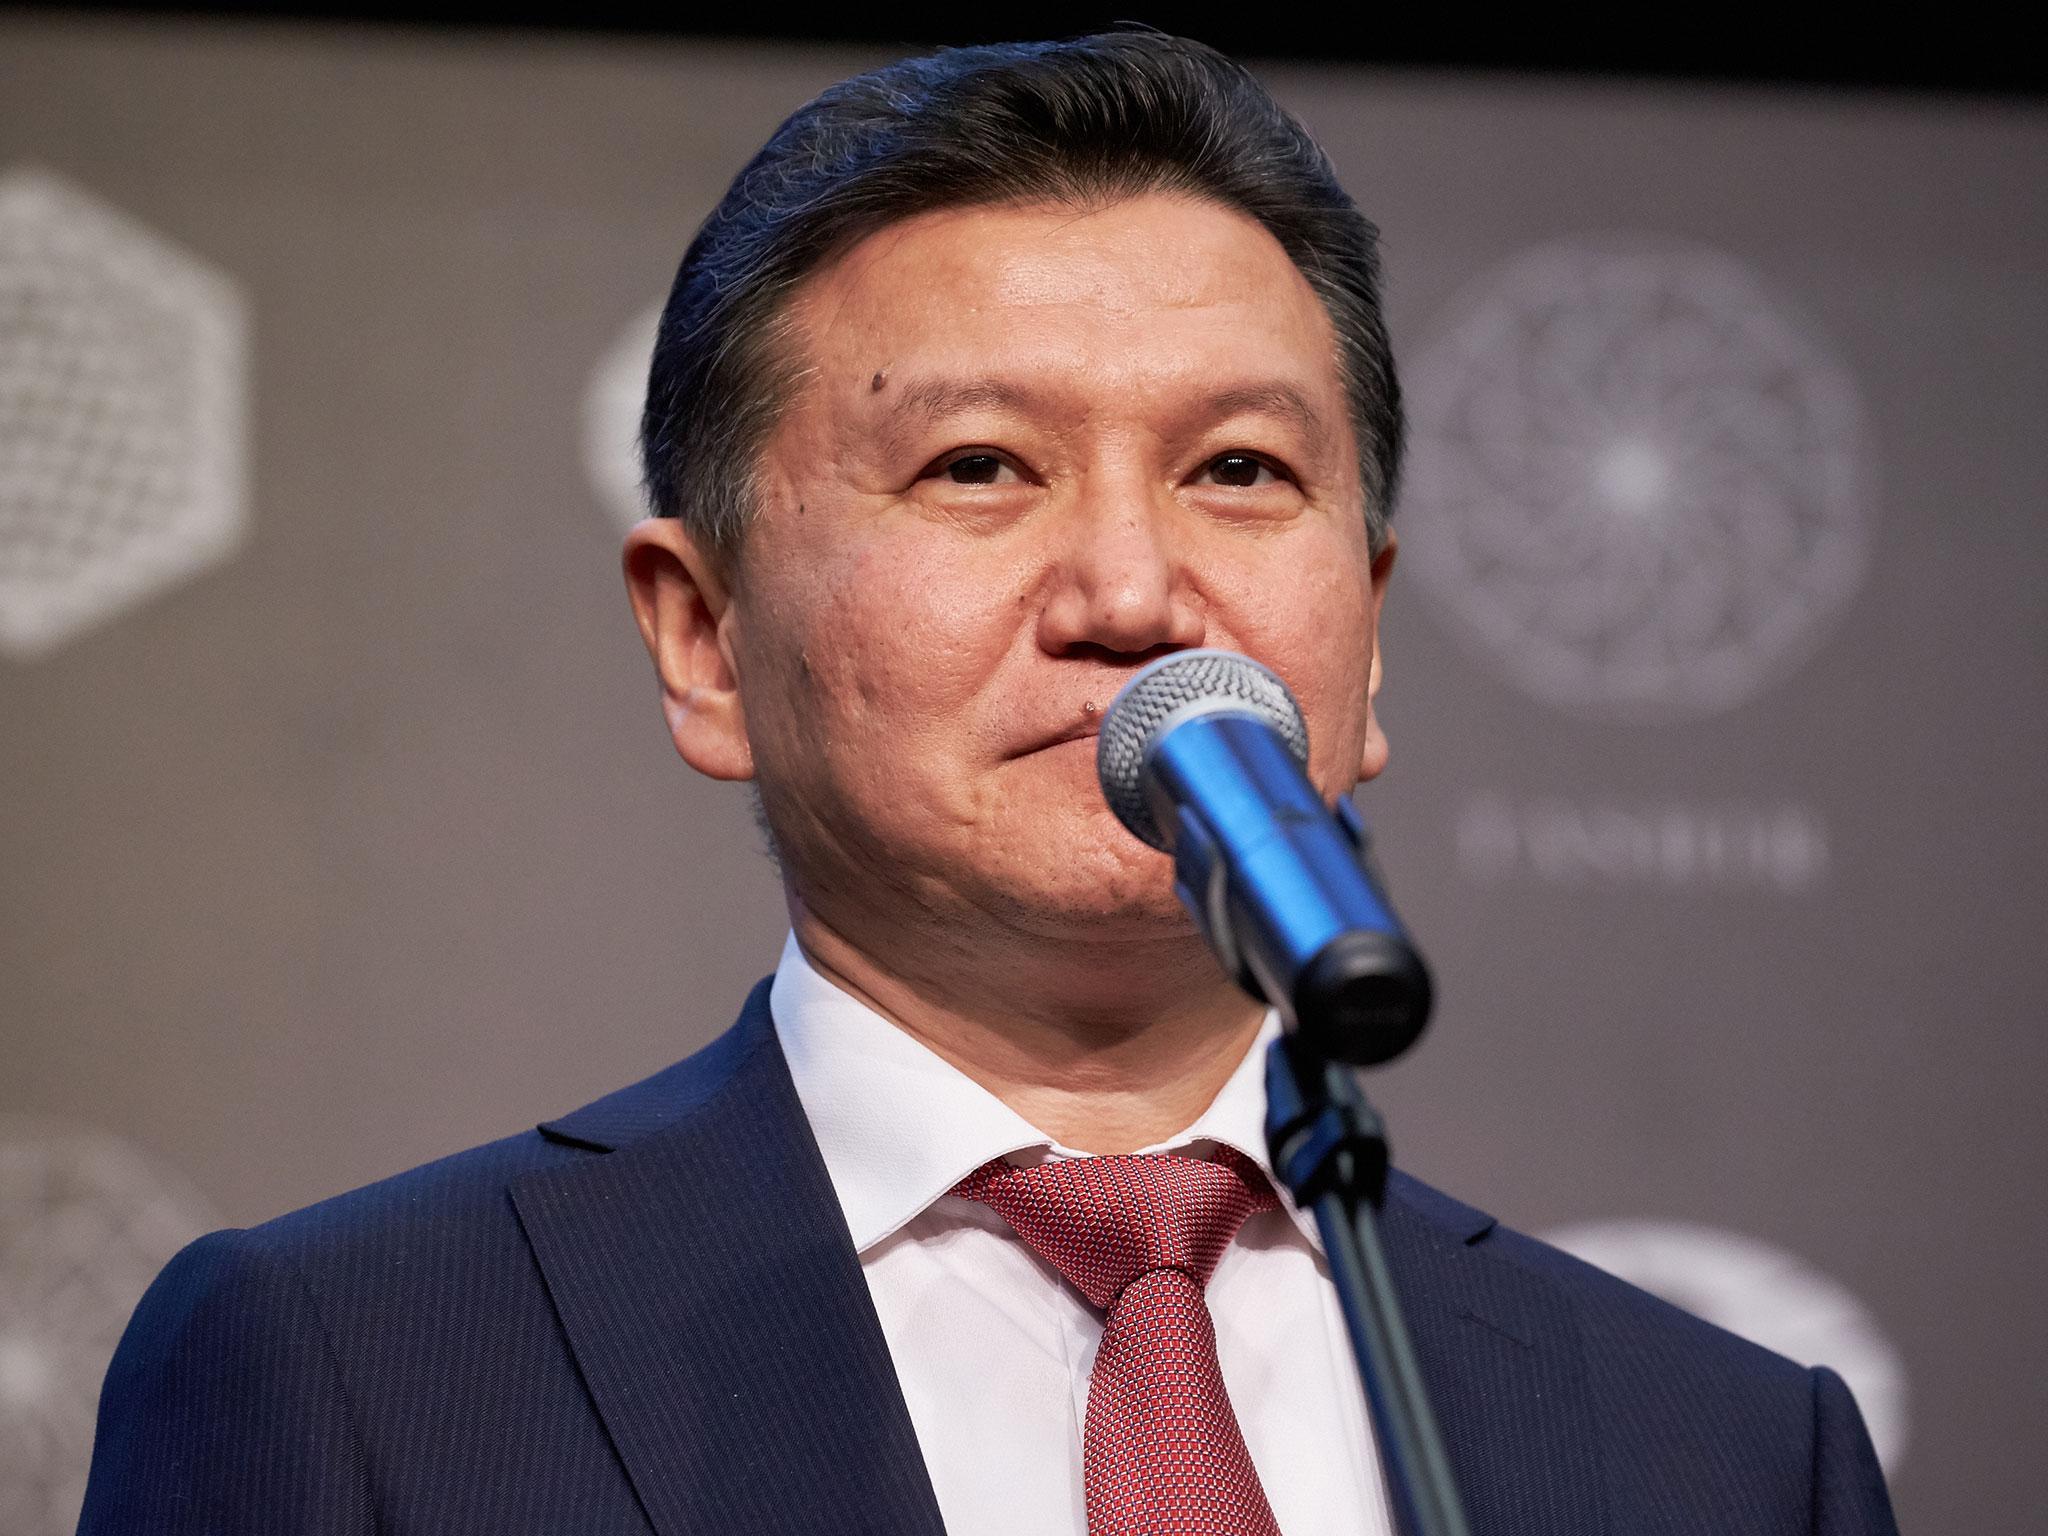 Kirsan Ilyumzhinov, a Russian multimillionaire and politician has been president of the chess governing body since 1995